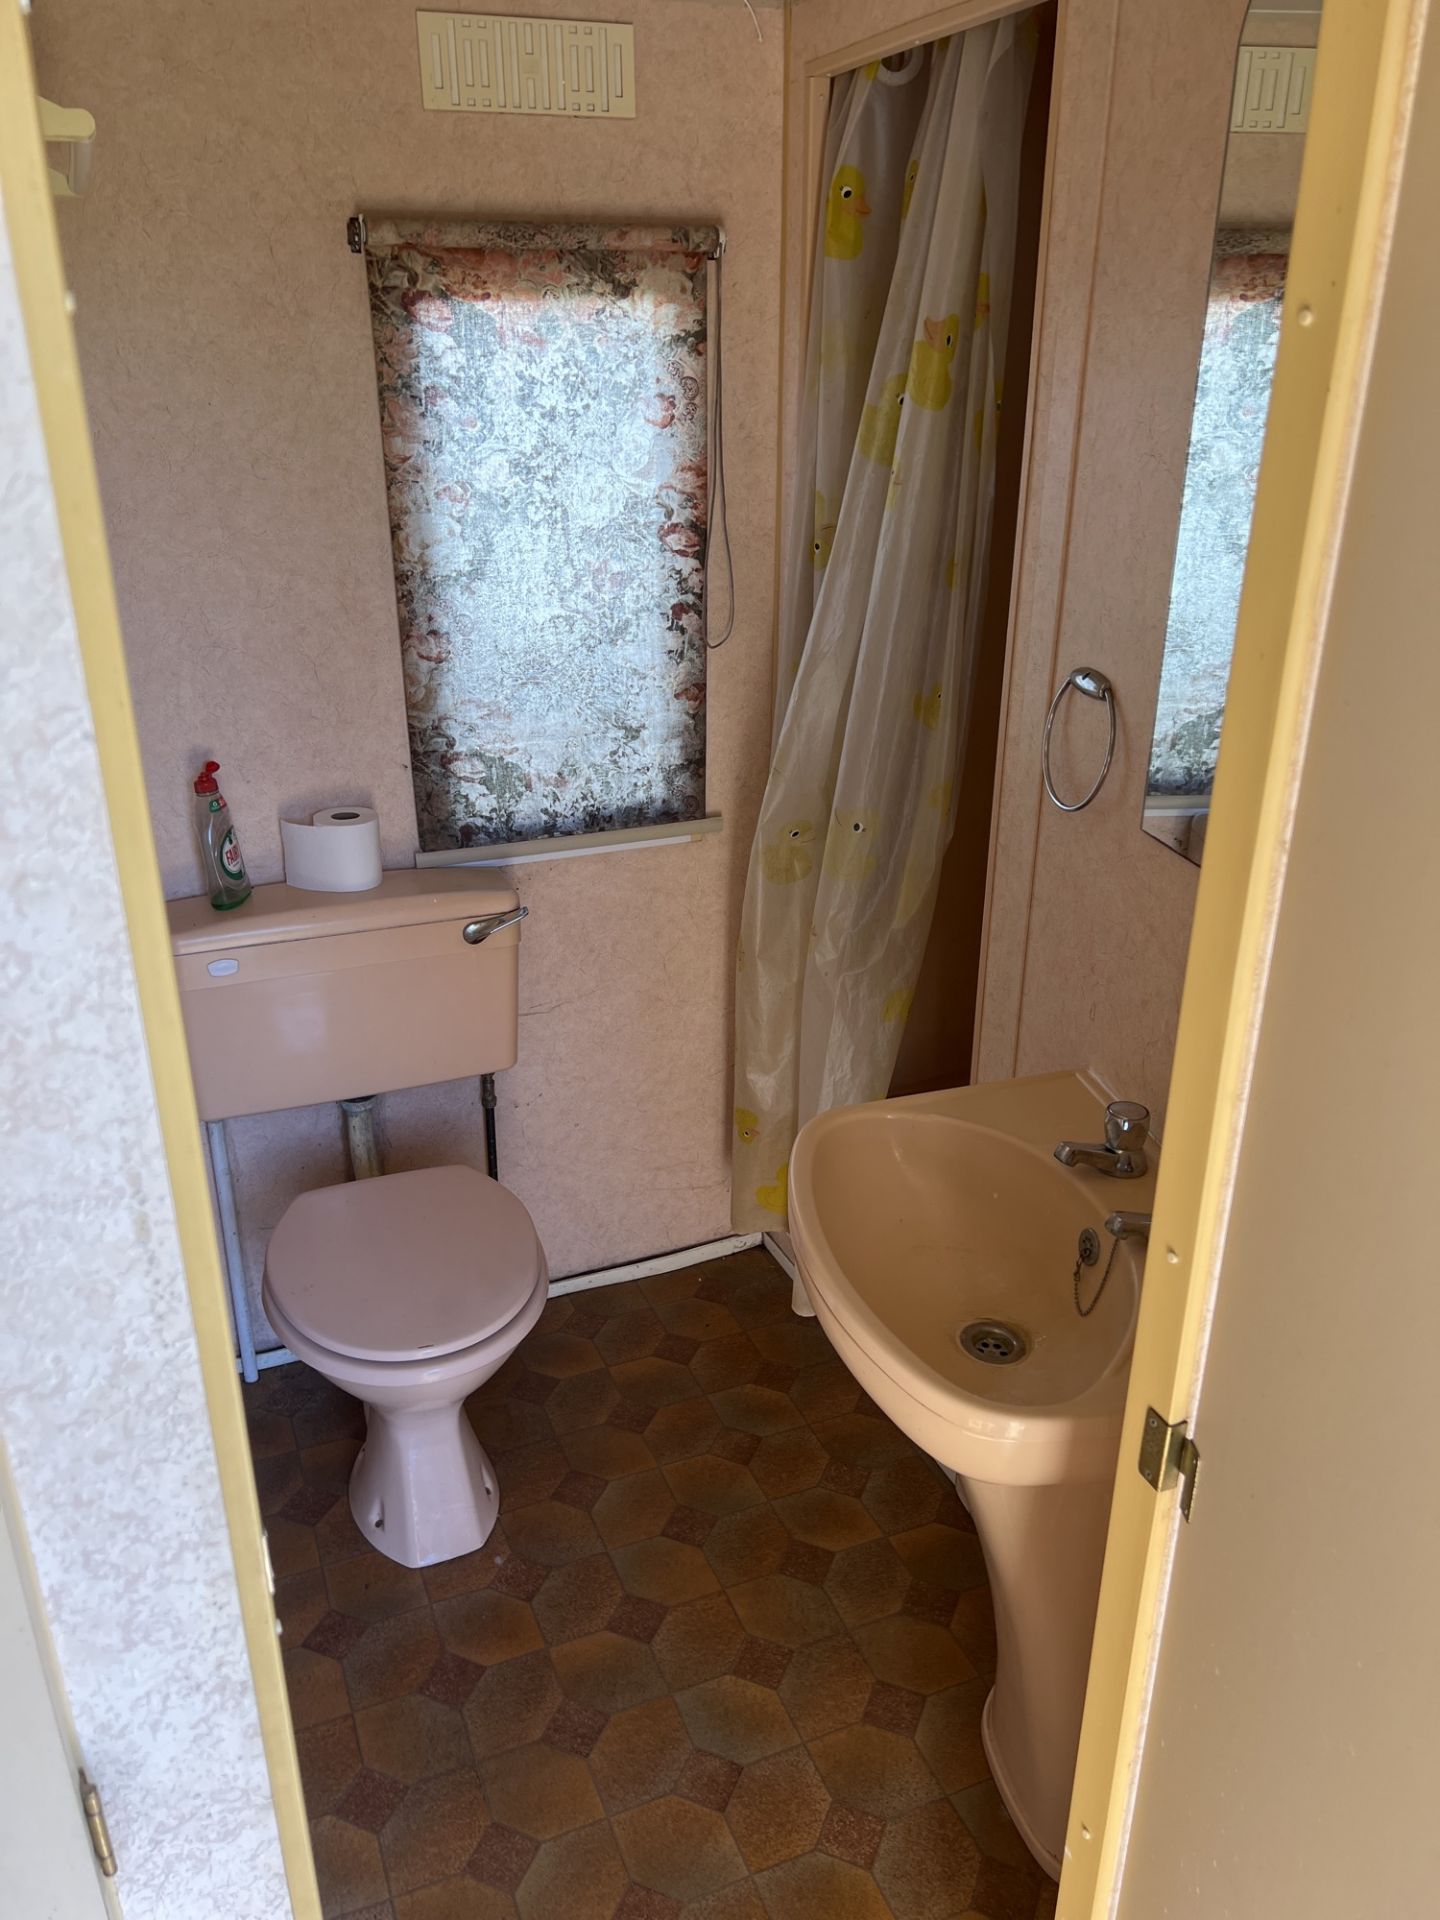 36ft mobile home - Image 11 of 14